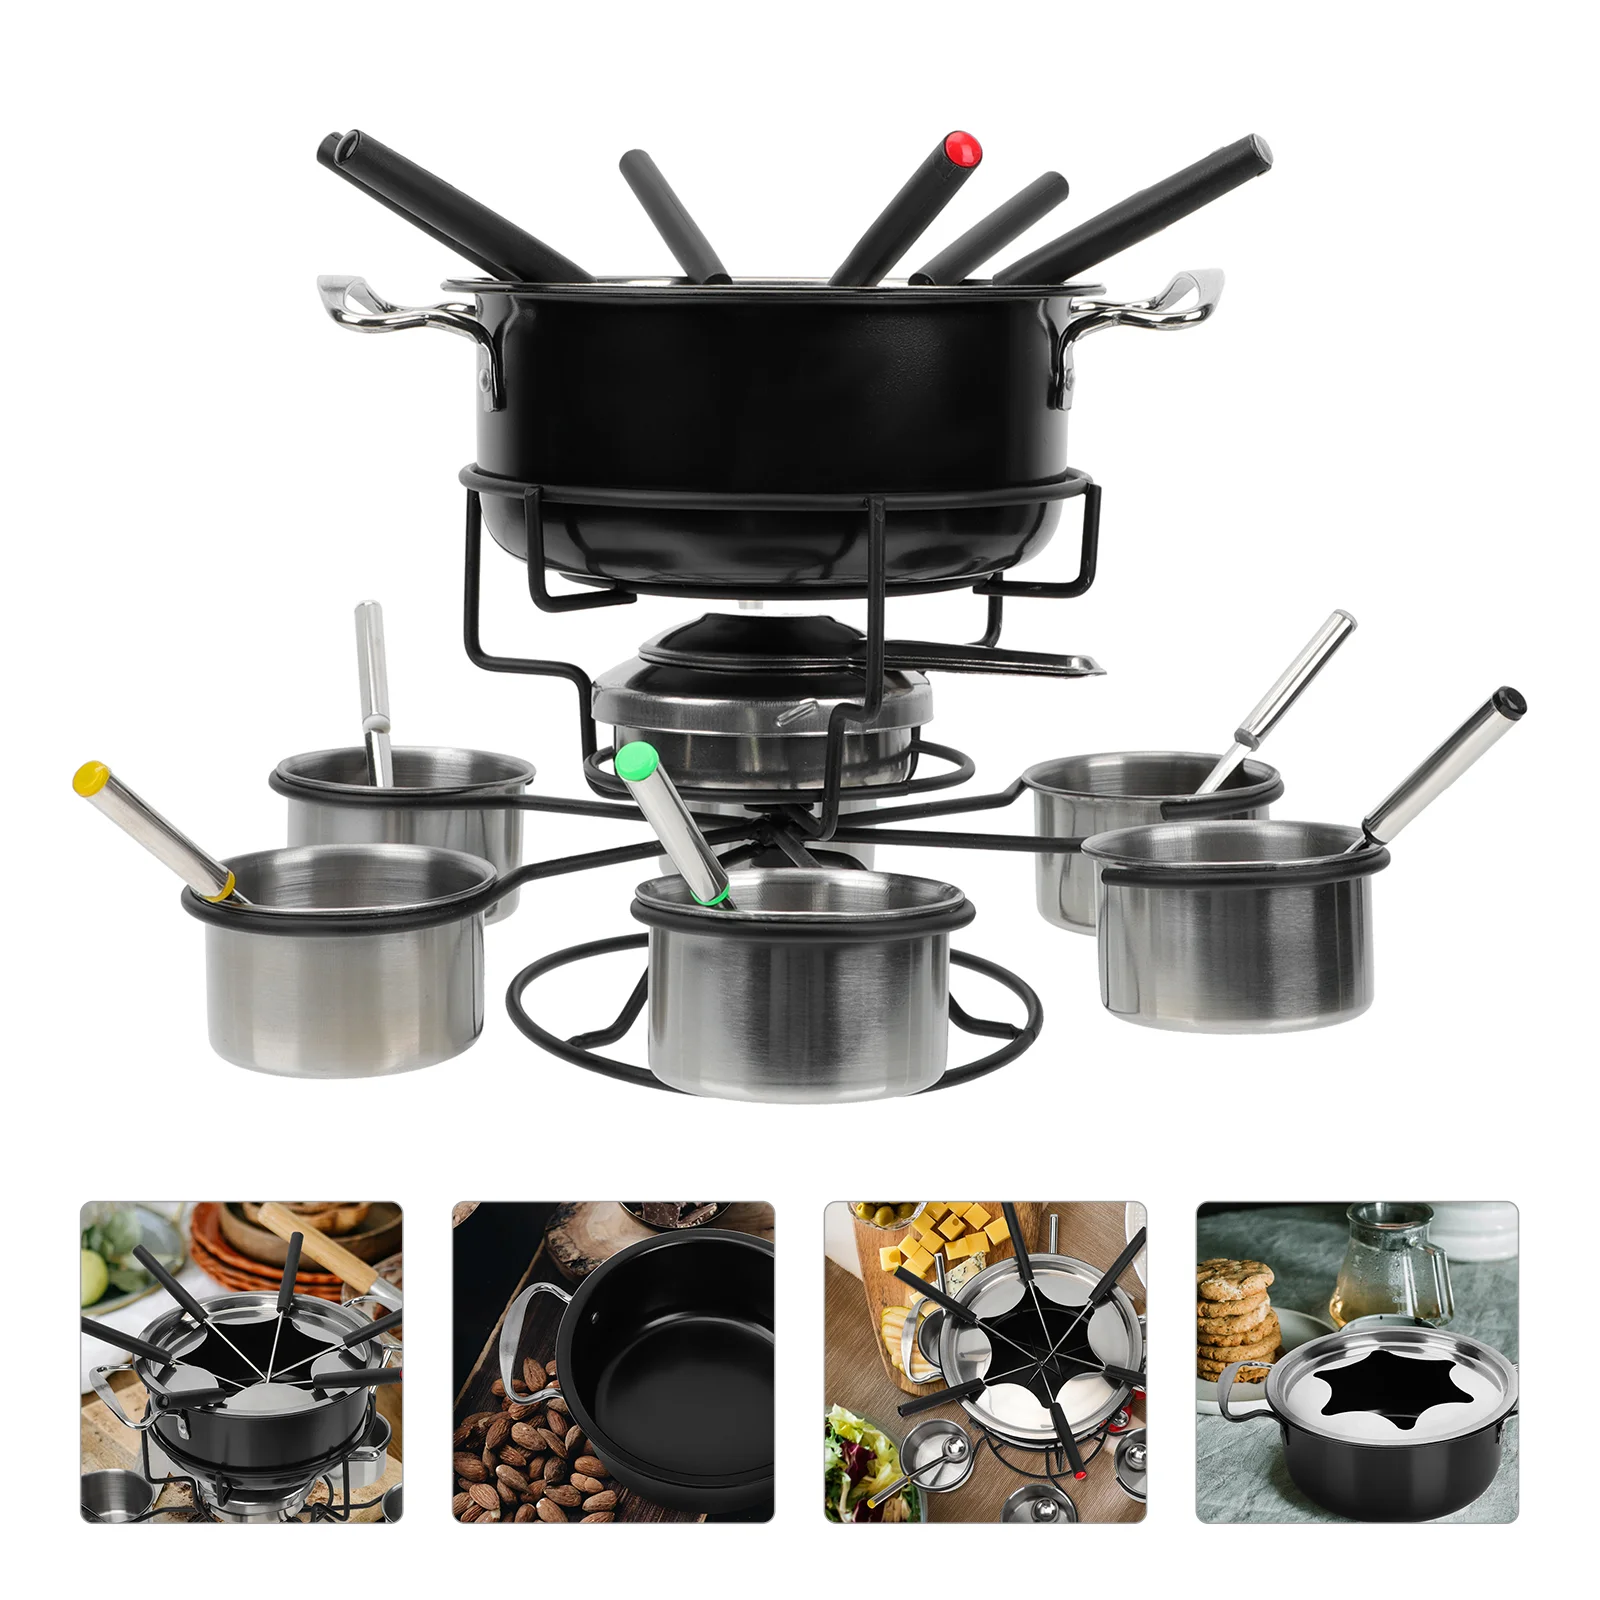 

Chocolate Fondue Pot Set Gift Sets Stainless Steel Cookware Cheese Grilling Stove Kitchen Melting Warmer